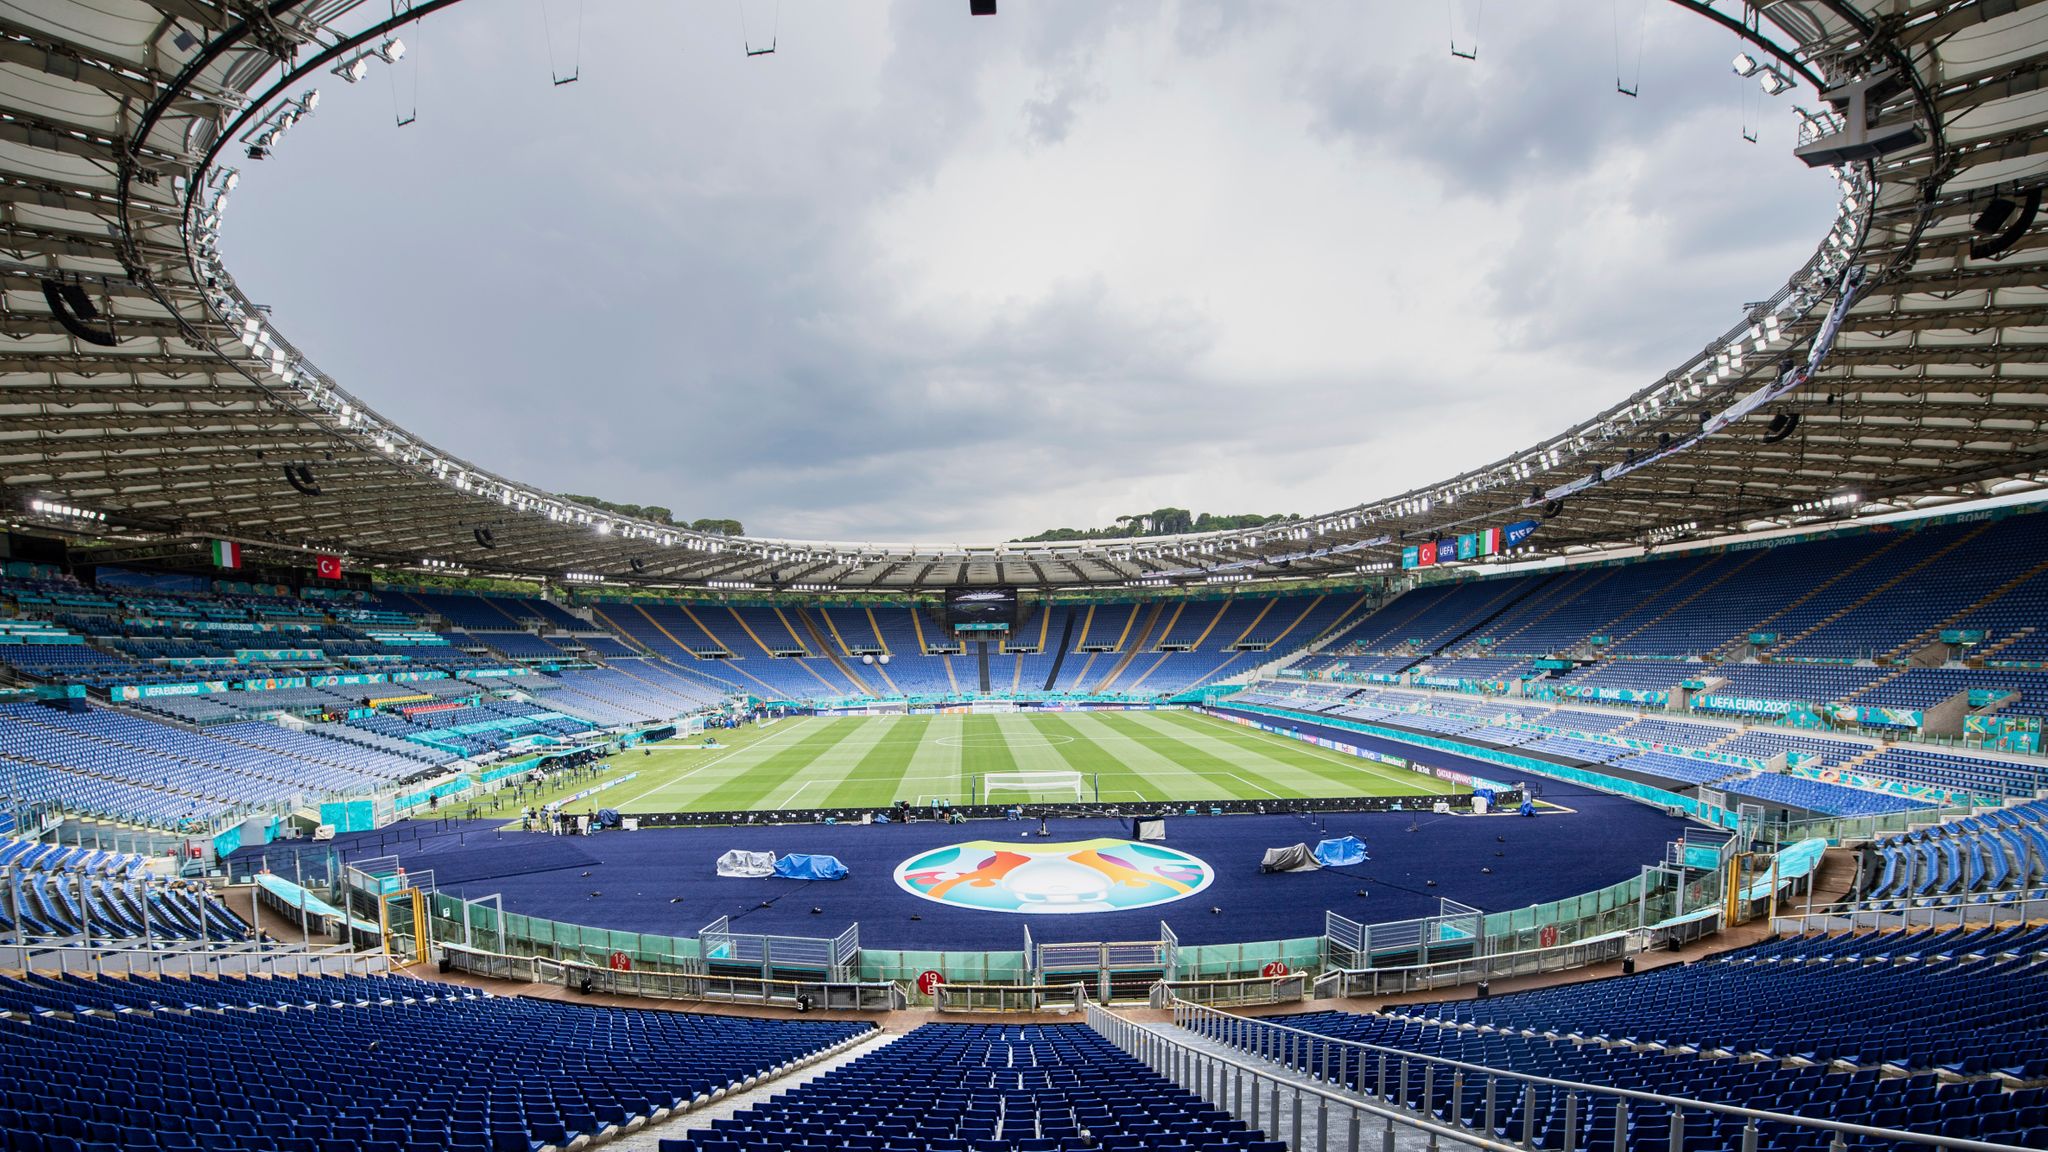 England Fans Travelling To Rome For Euro 2020 Quarter Final Vs Ukraine Will Not Be Allowed In Stadium, Italian Embassy Warns